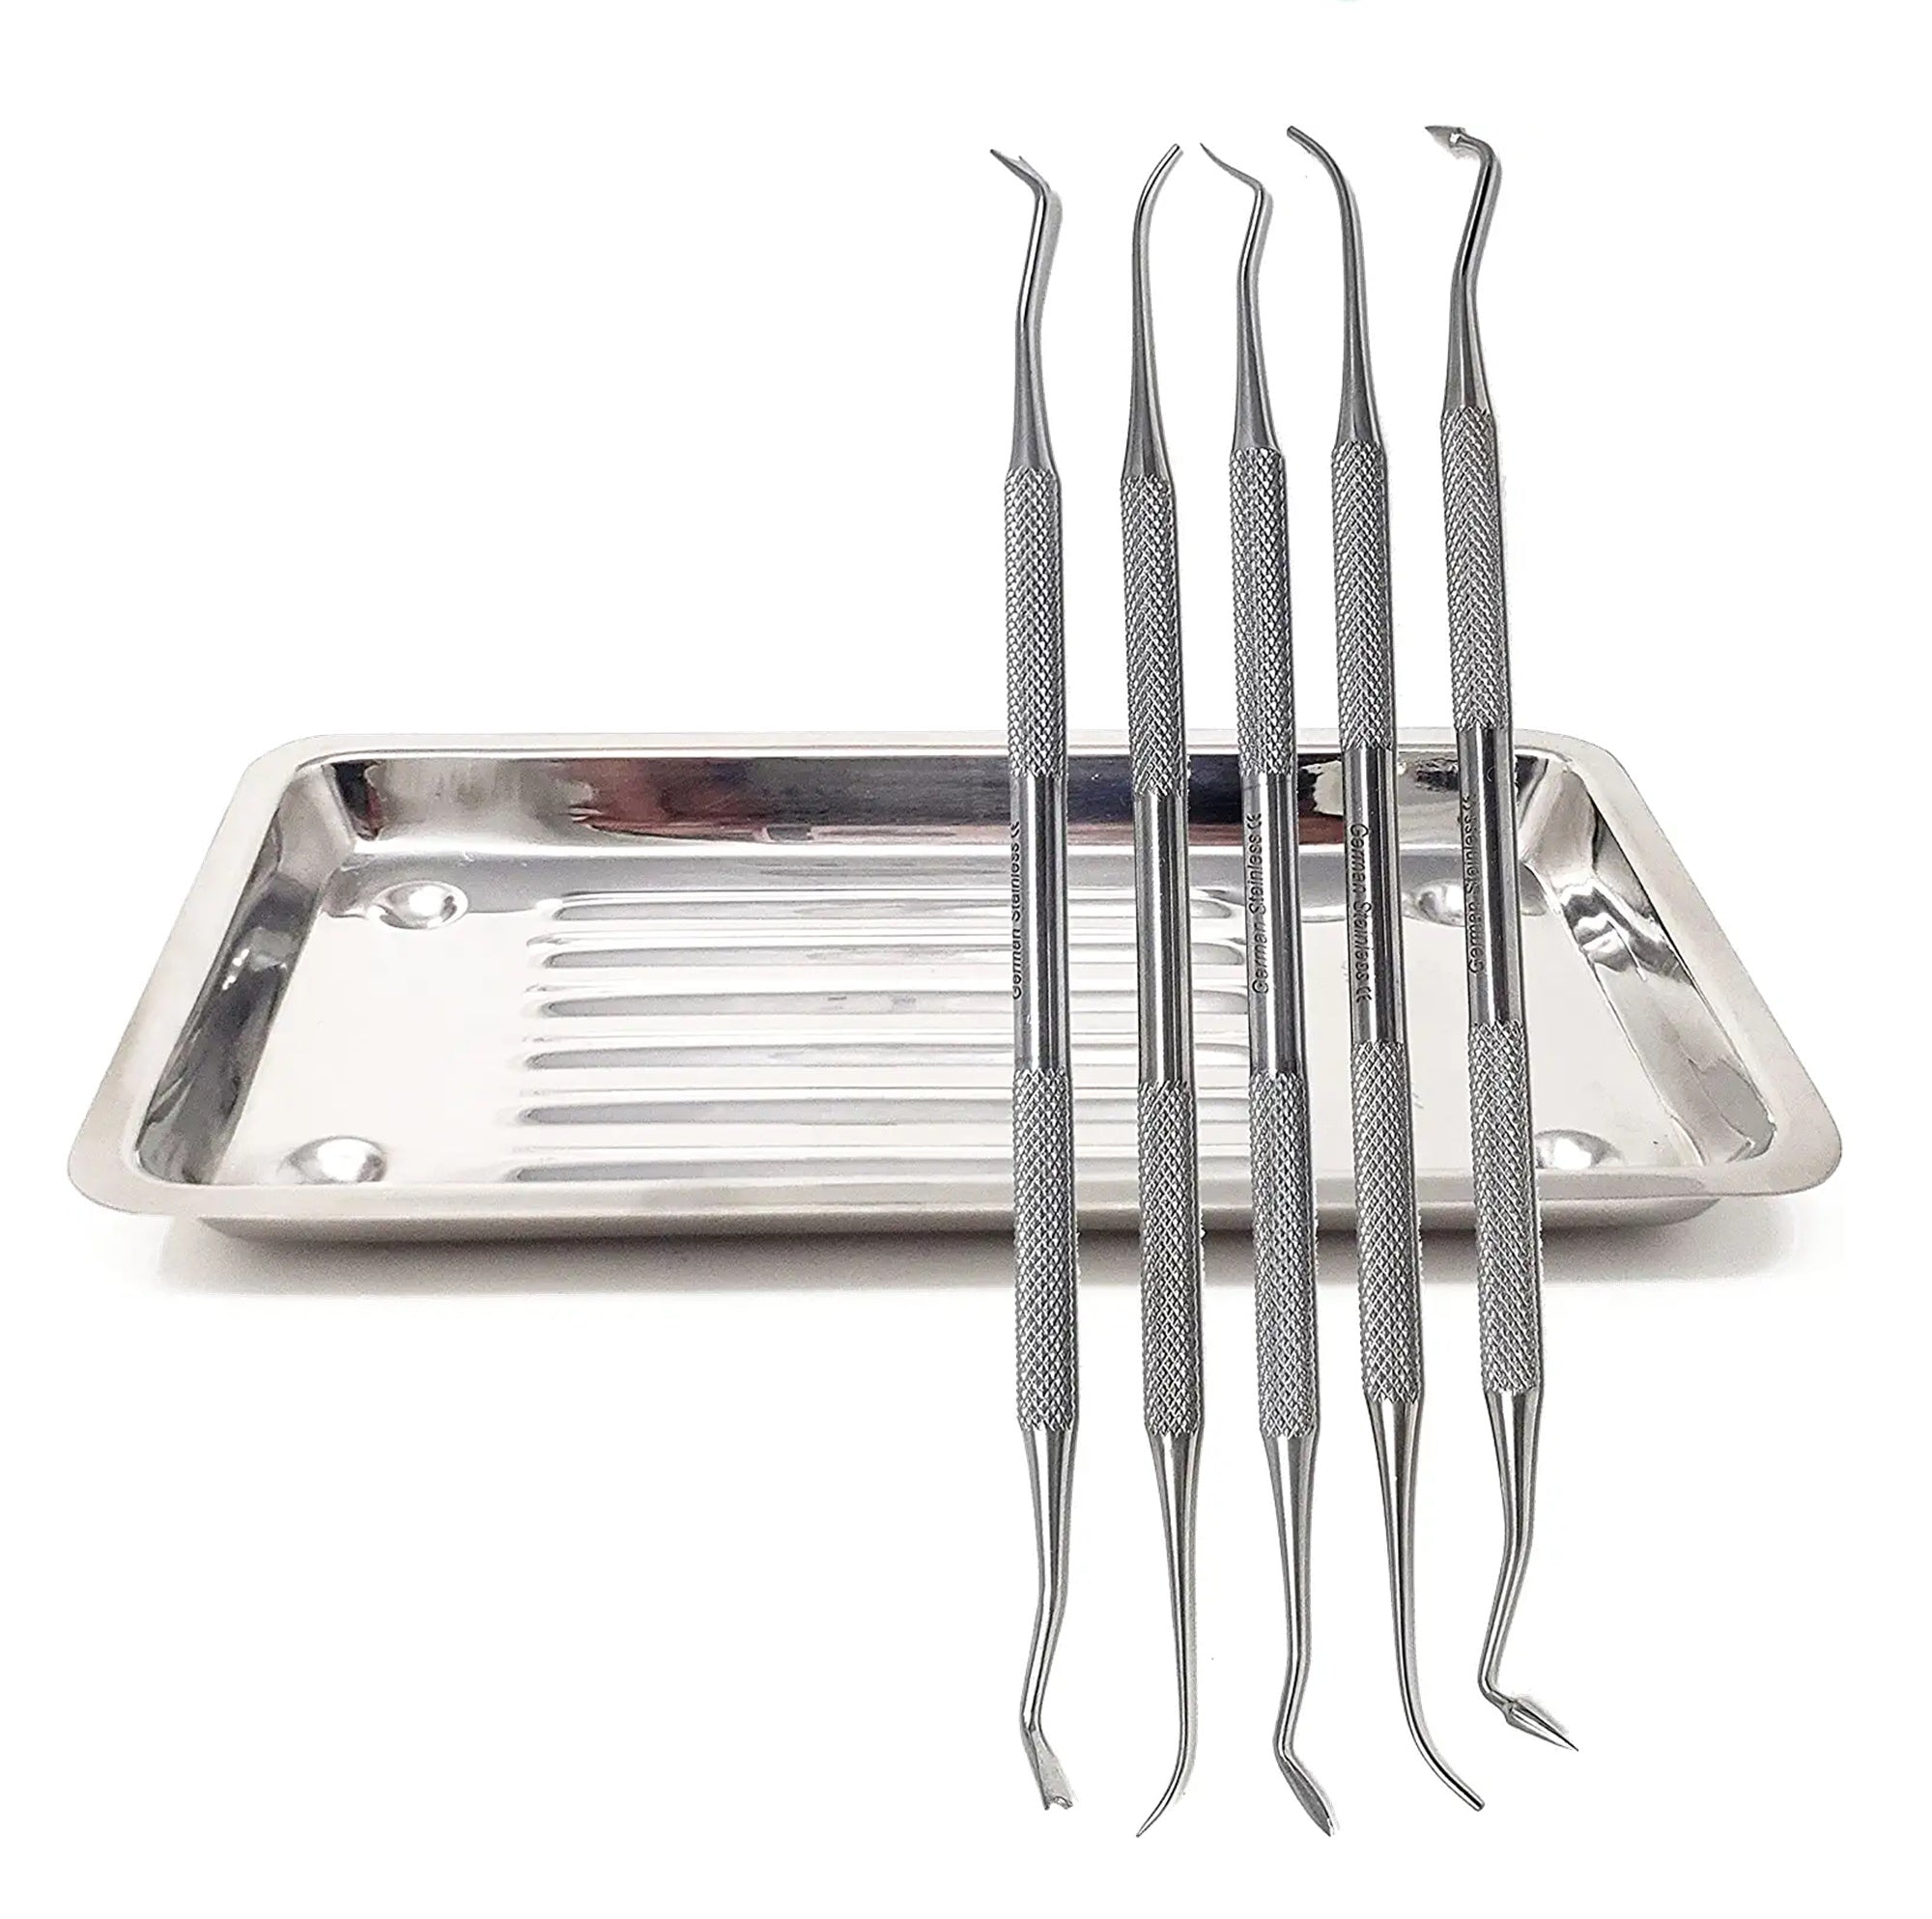 10Pcs/ Set New Stainless Steel Wax Carving Dentist Surgical Dental Lab